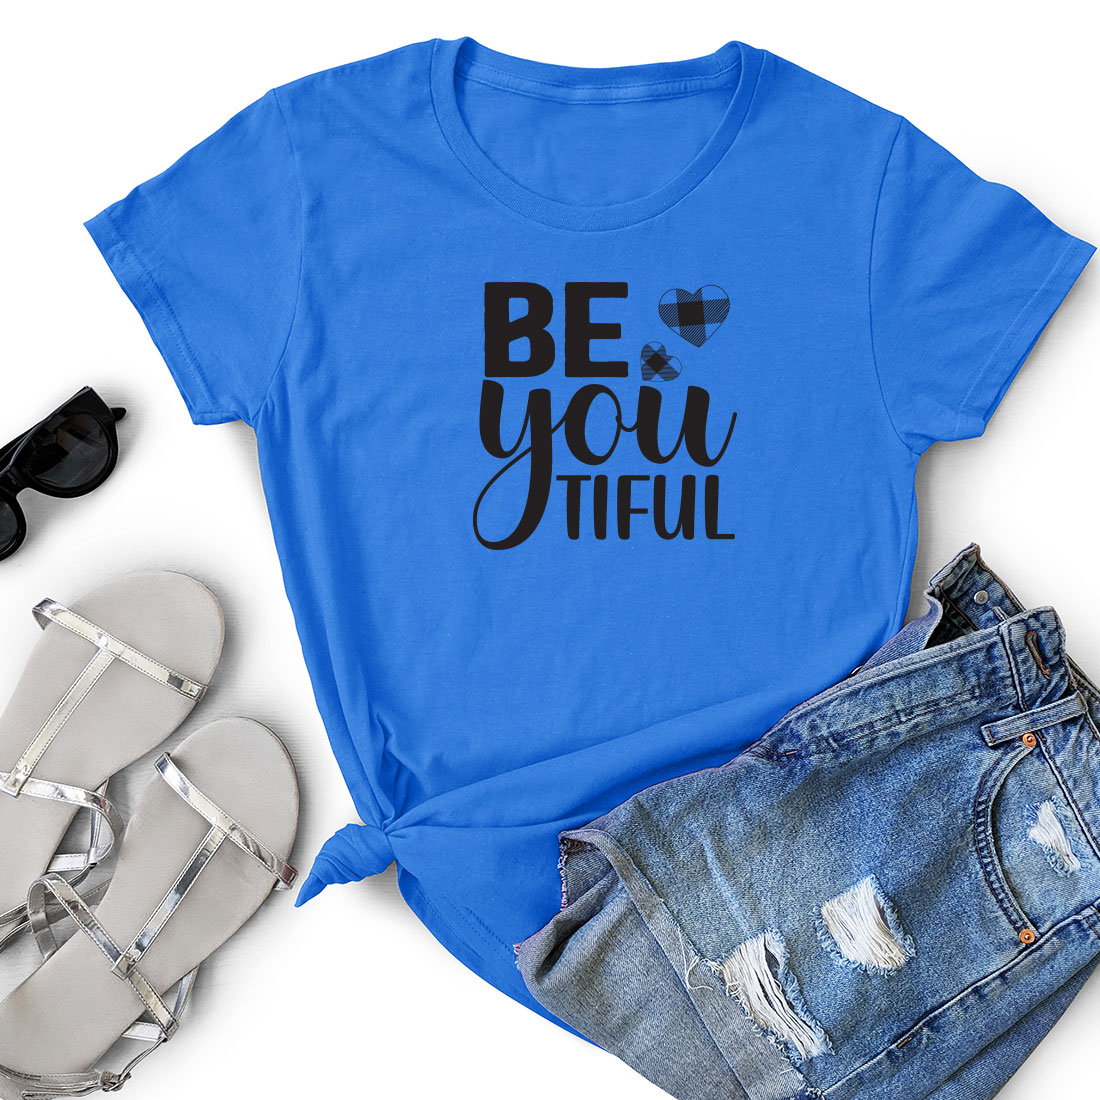 T - shirt that says be you tiful next to a pair of shorts.